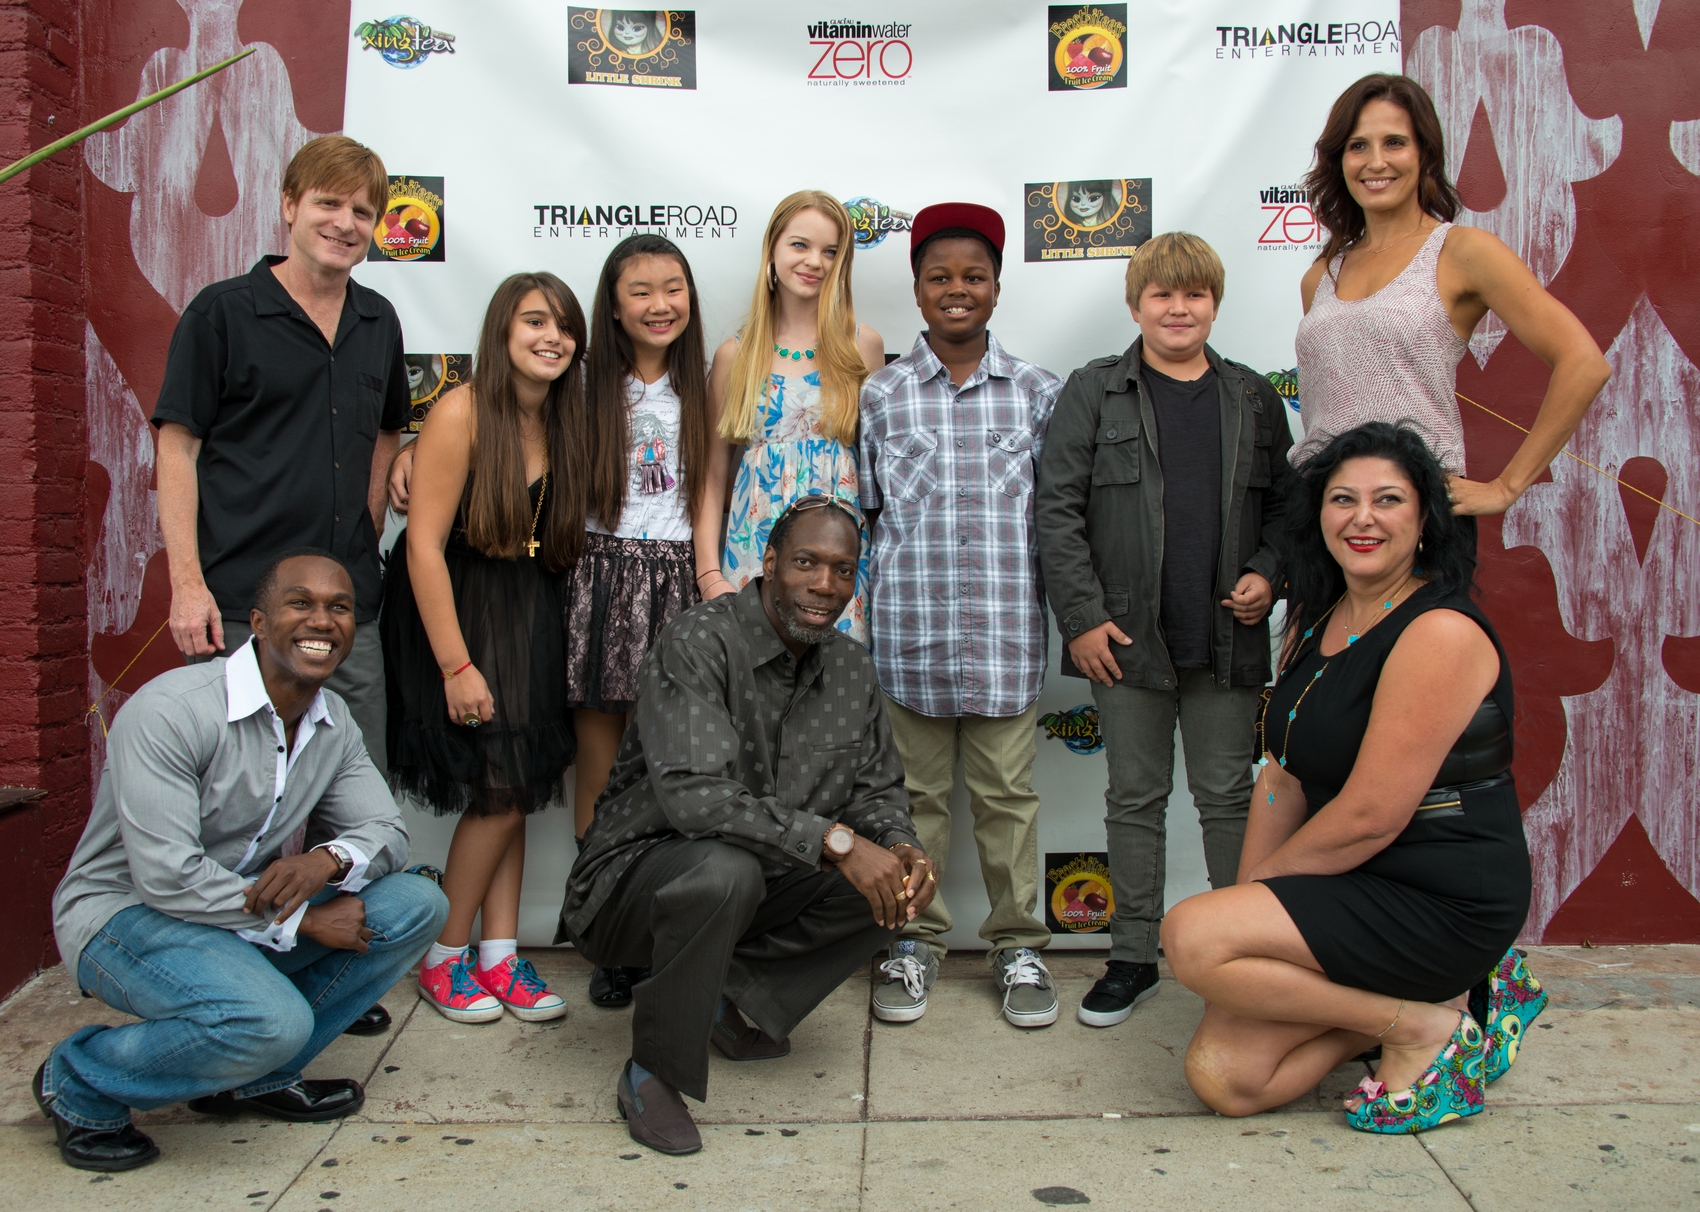 Me and the cast and crew at the 